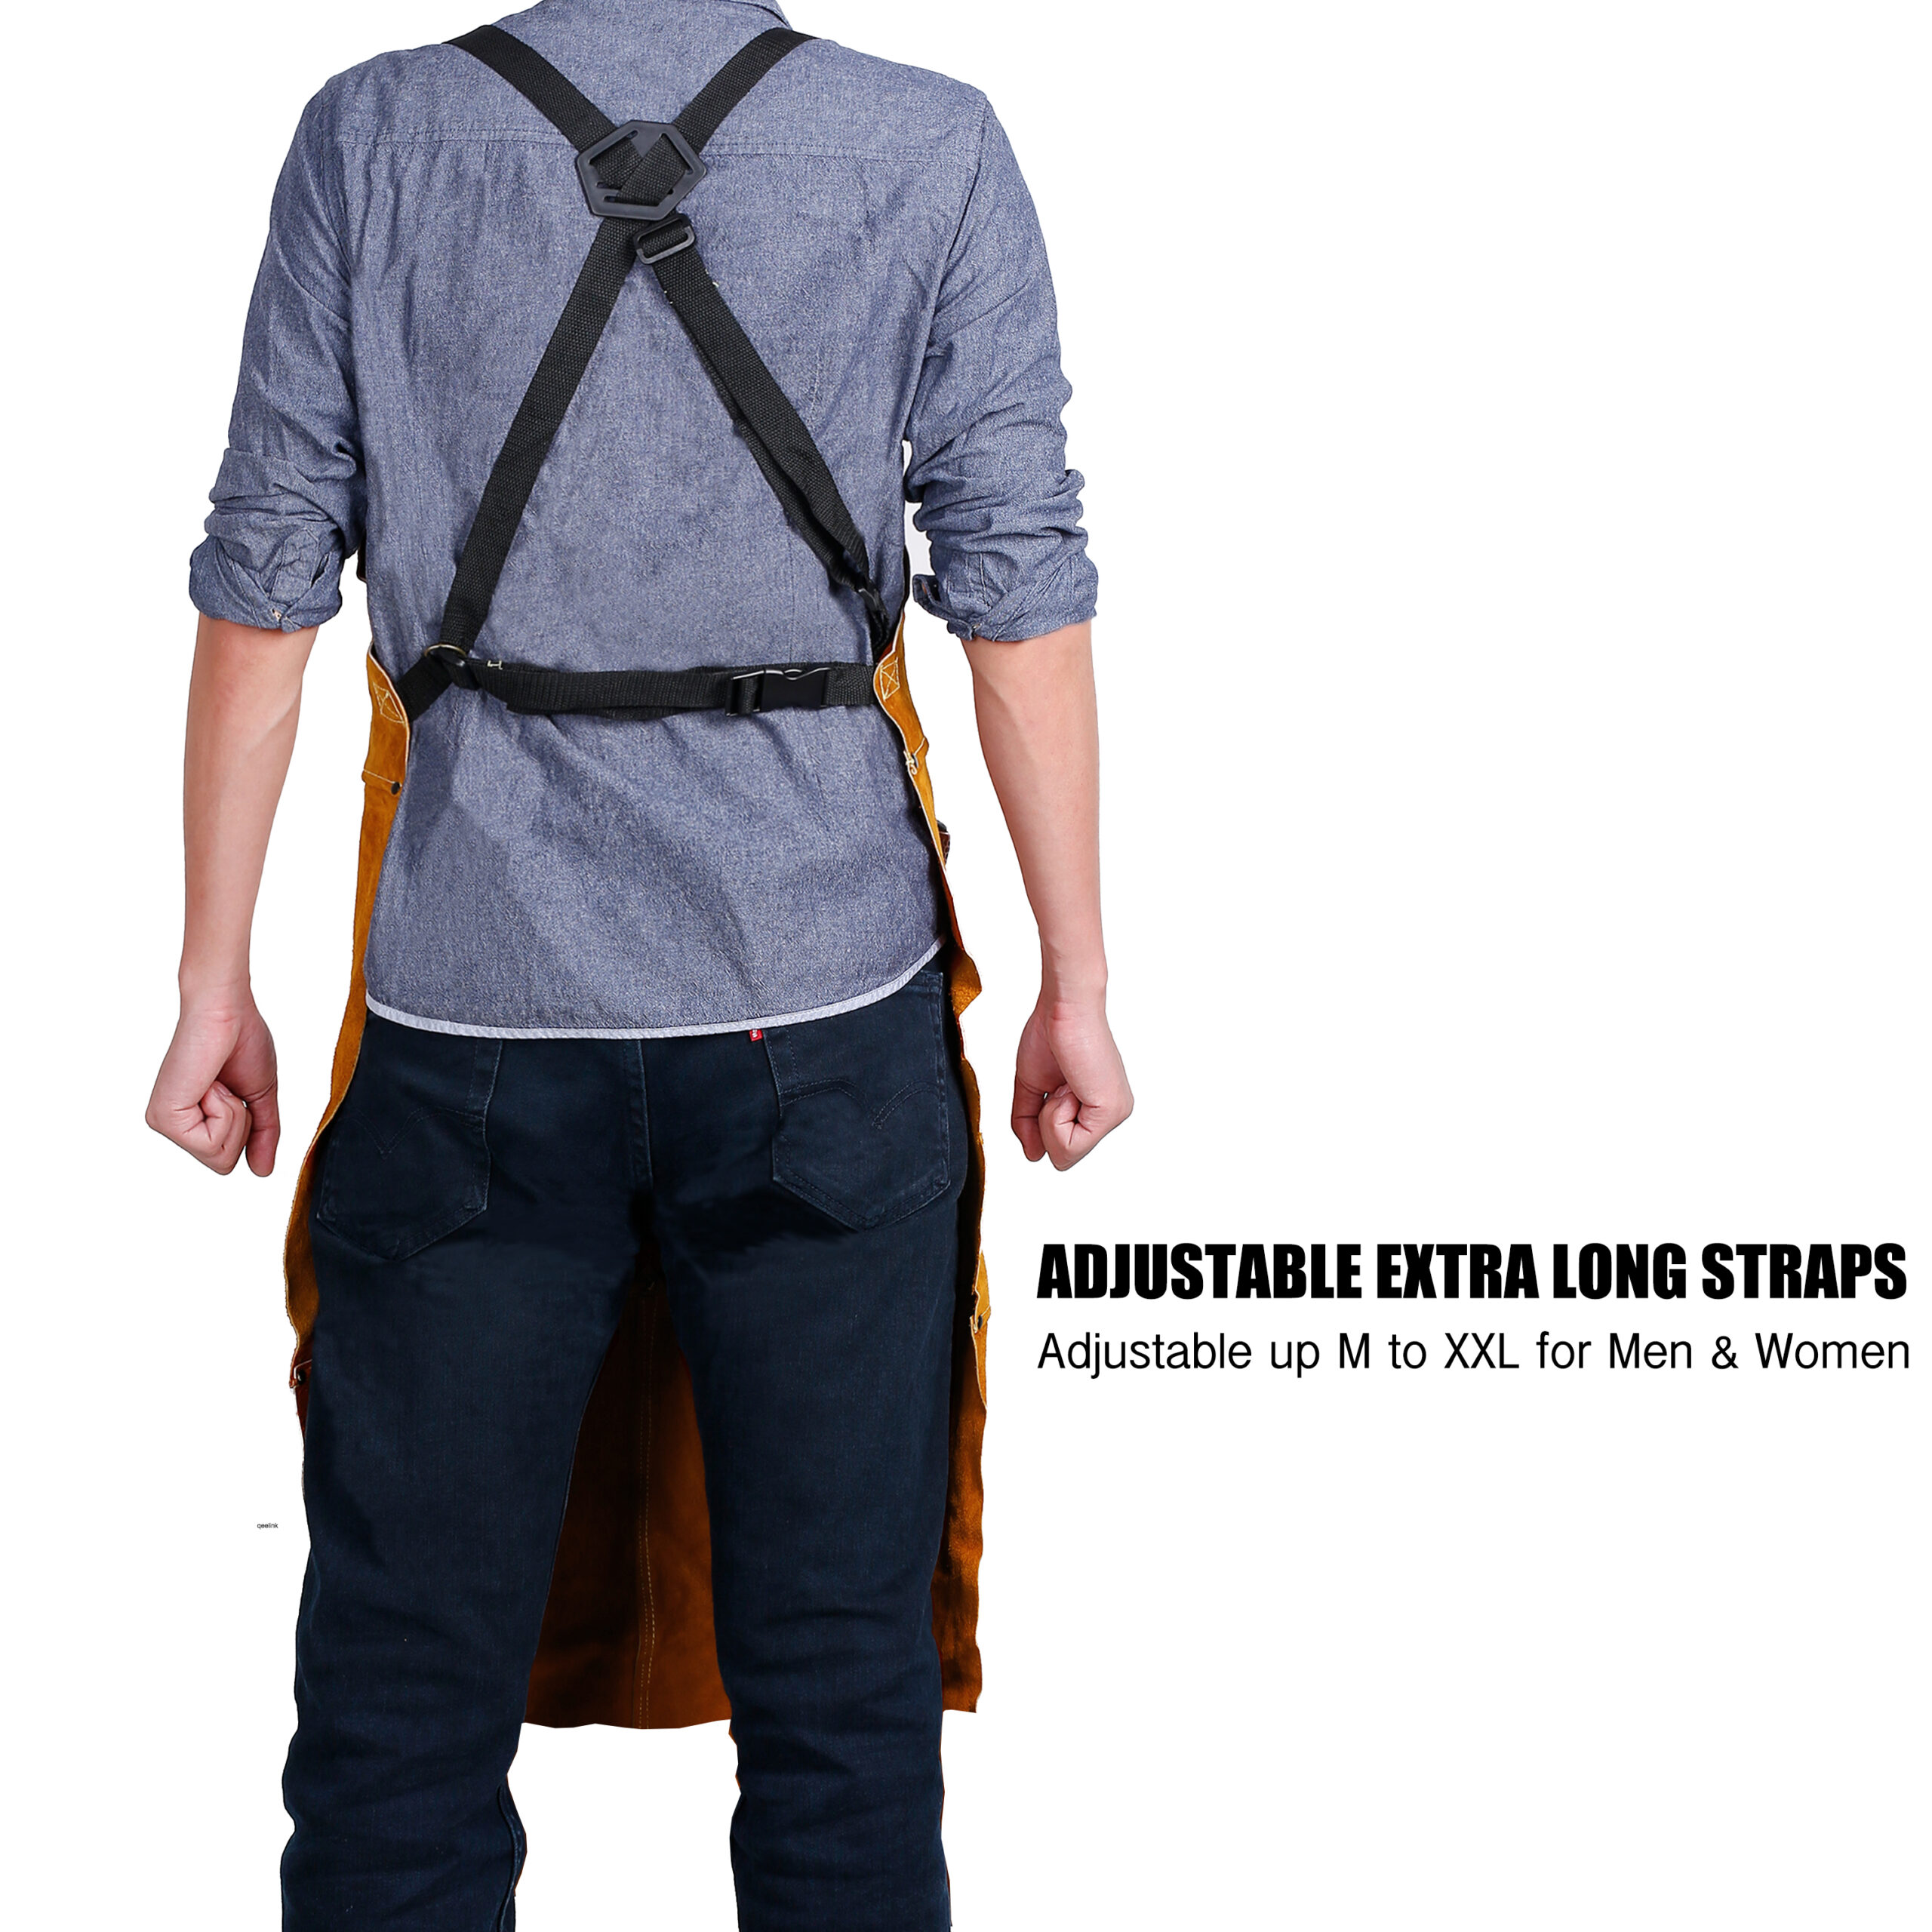 Heavy Duty Workshop Apron for Men NXLWXN Leather Welding Apron with Pocket 